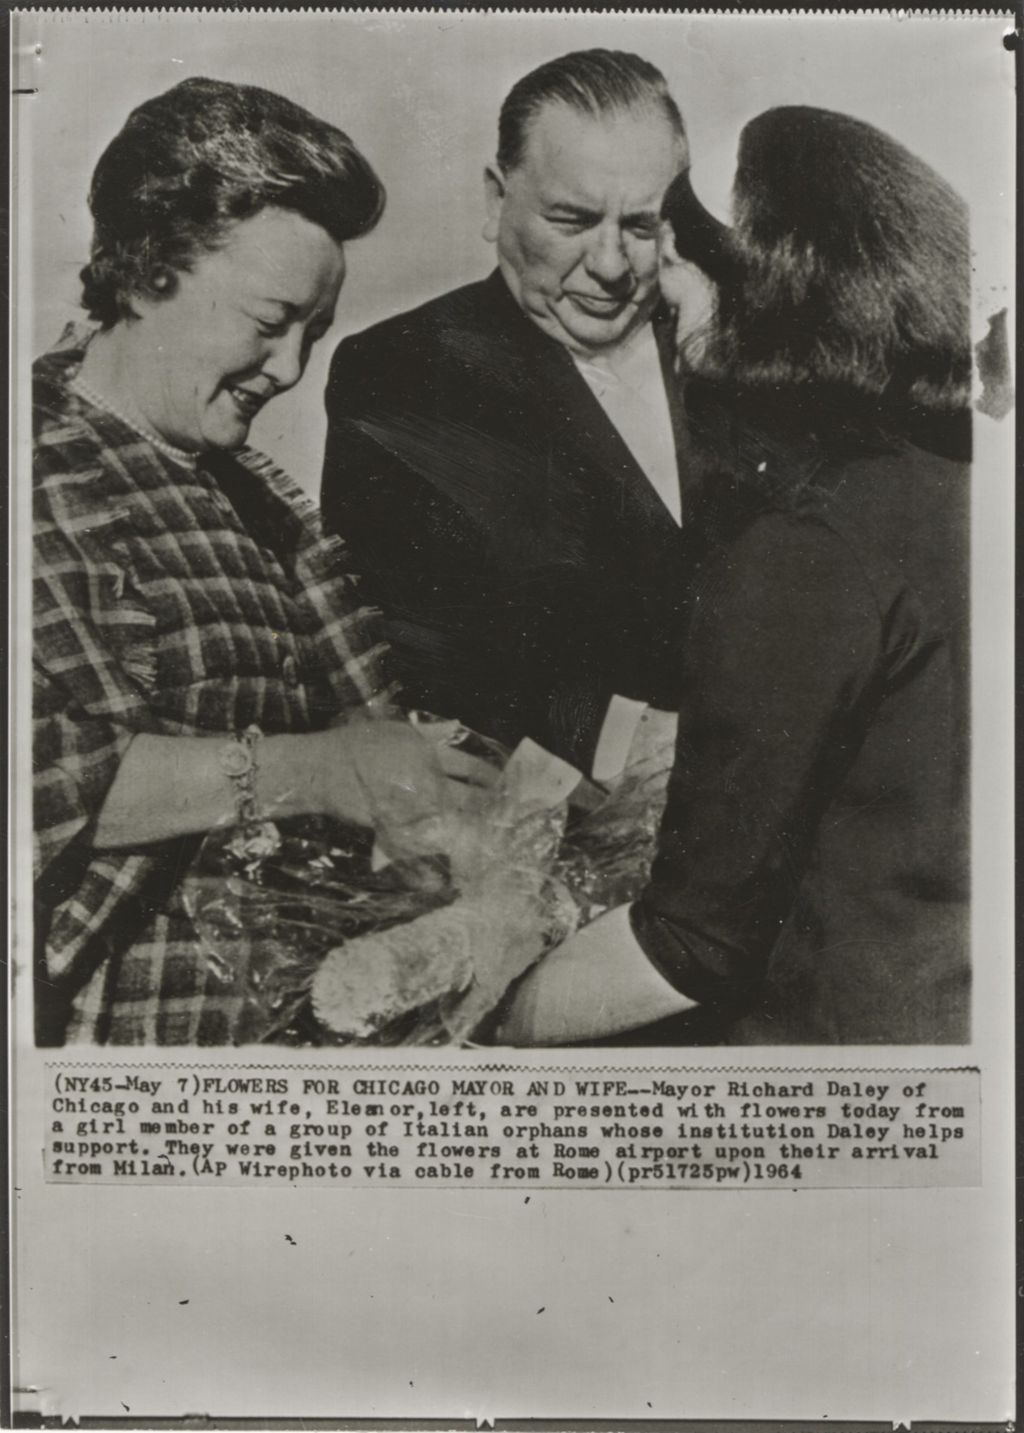 Miniature of Richard J. Daley and Eleanor Daley receiving flowers at Rome airport